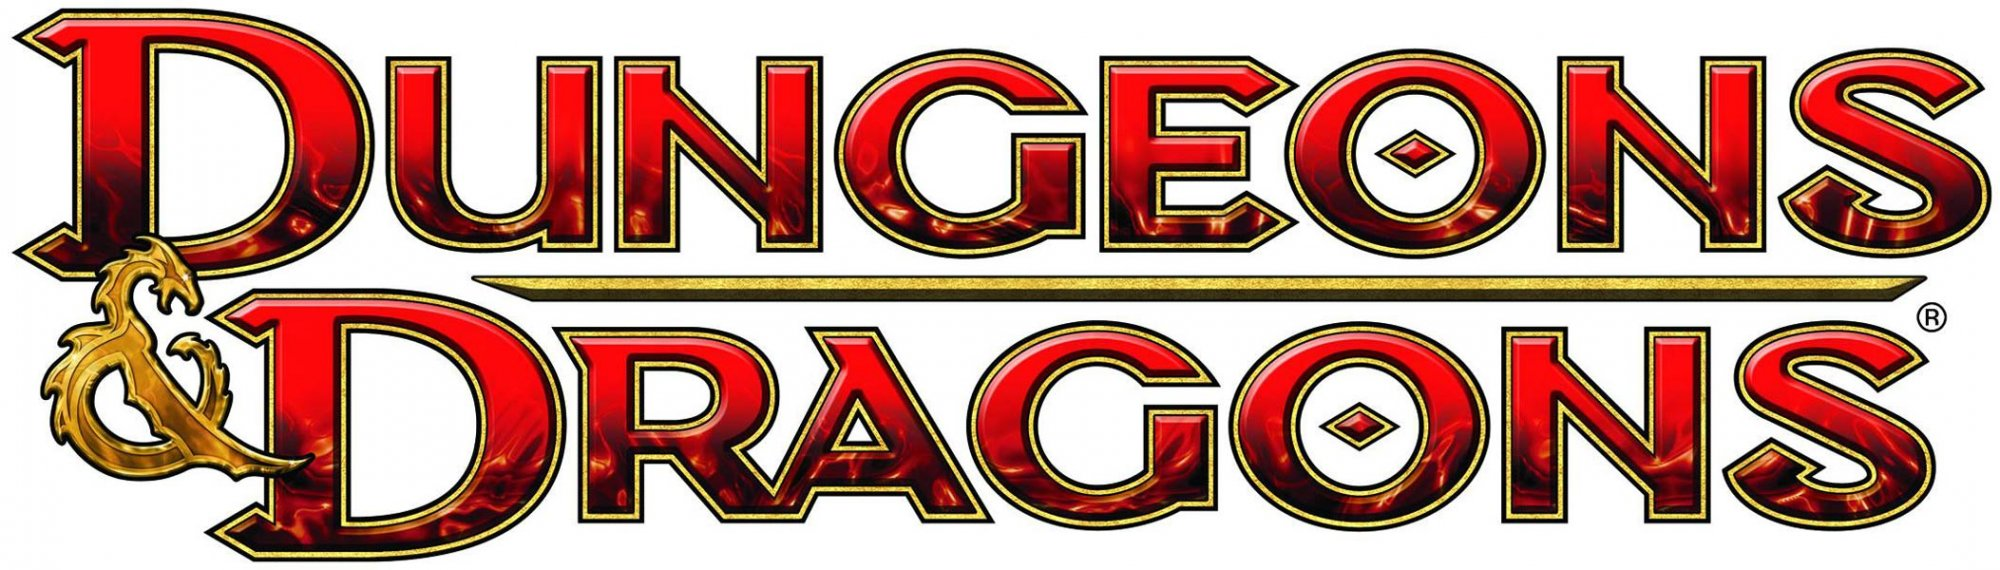 dungeons-and-dragons-logo.png